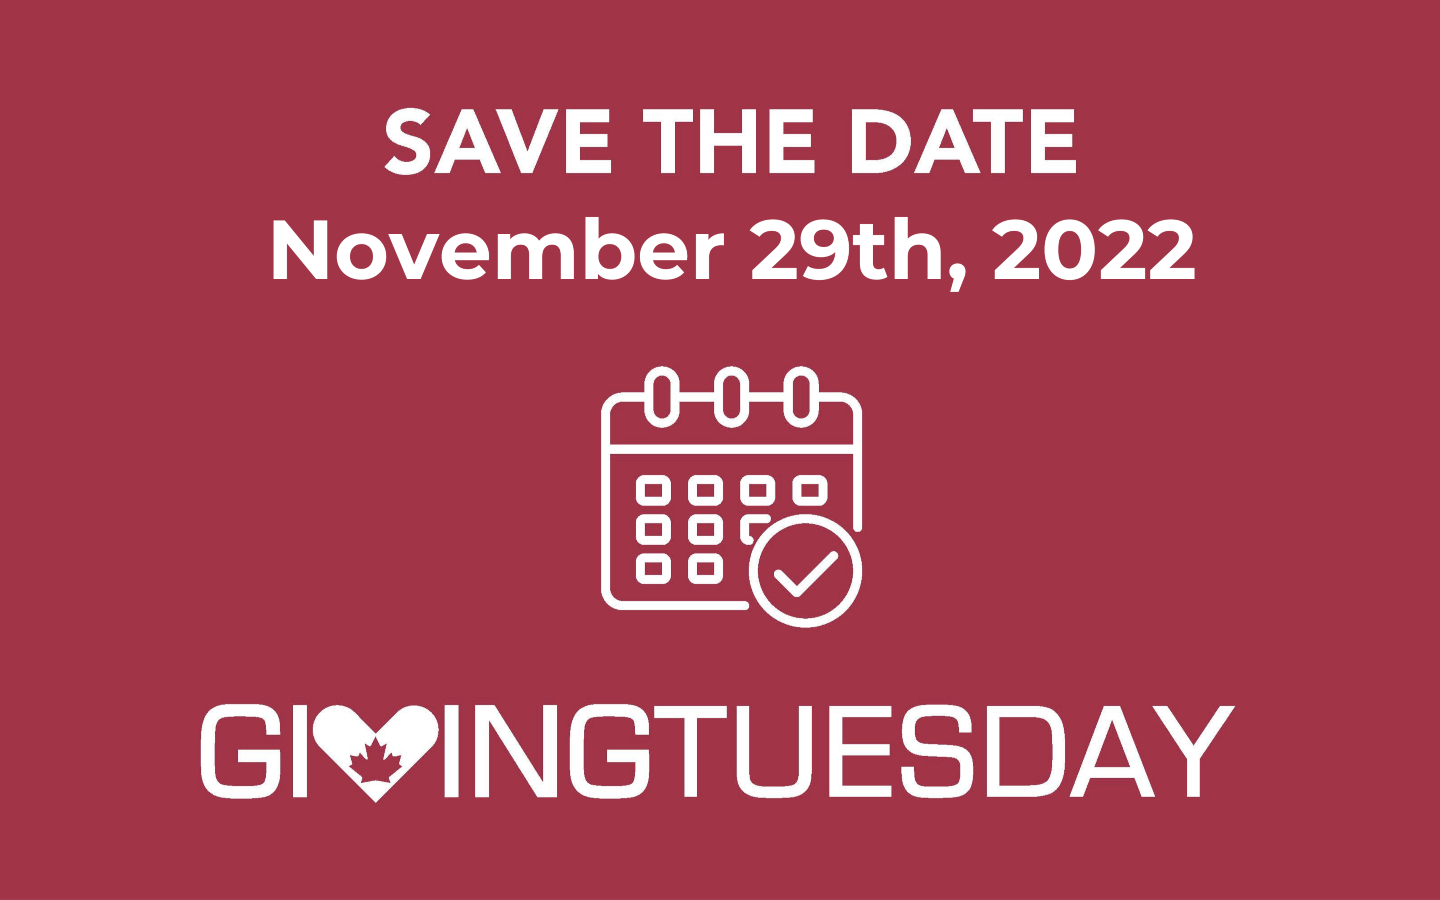 A red Giving Tuesday poster that says to save the date November 29th, 2022, with an icon of a calendar in the middle